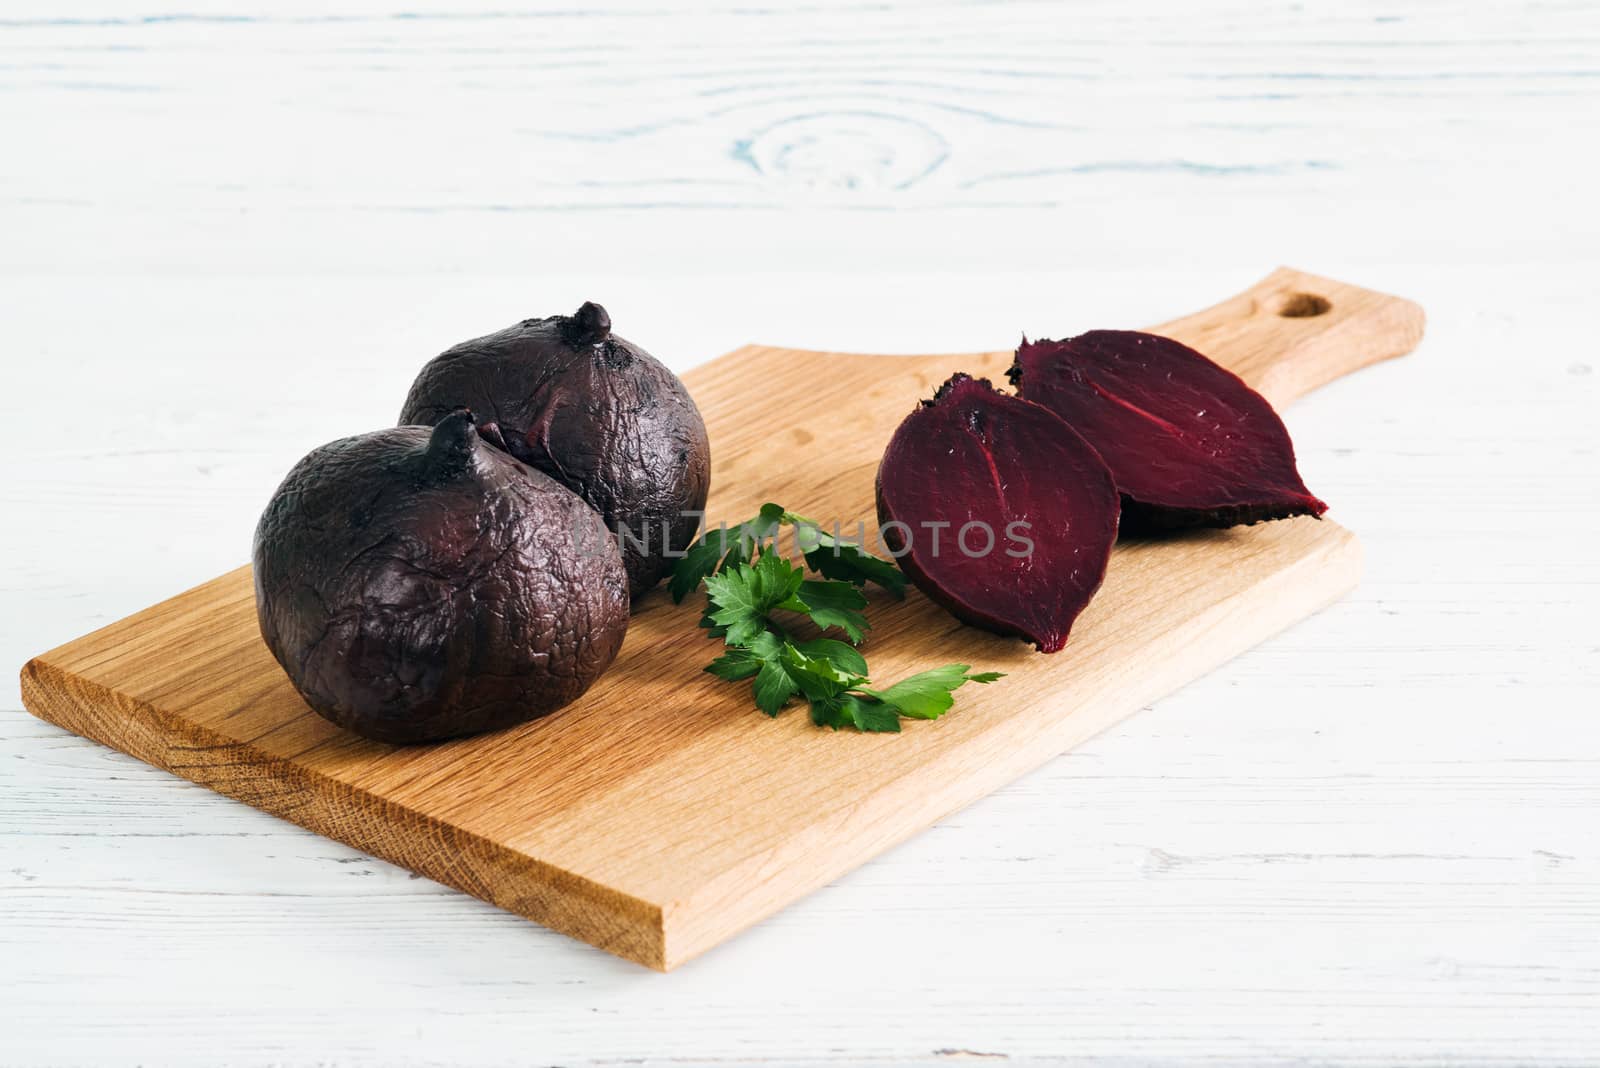 Boiled beets with parsley on board by kzen